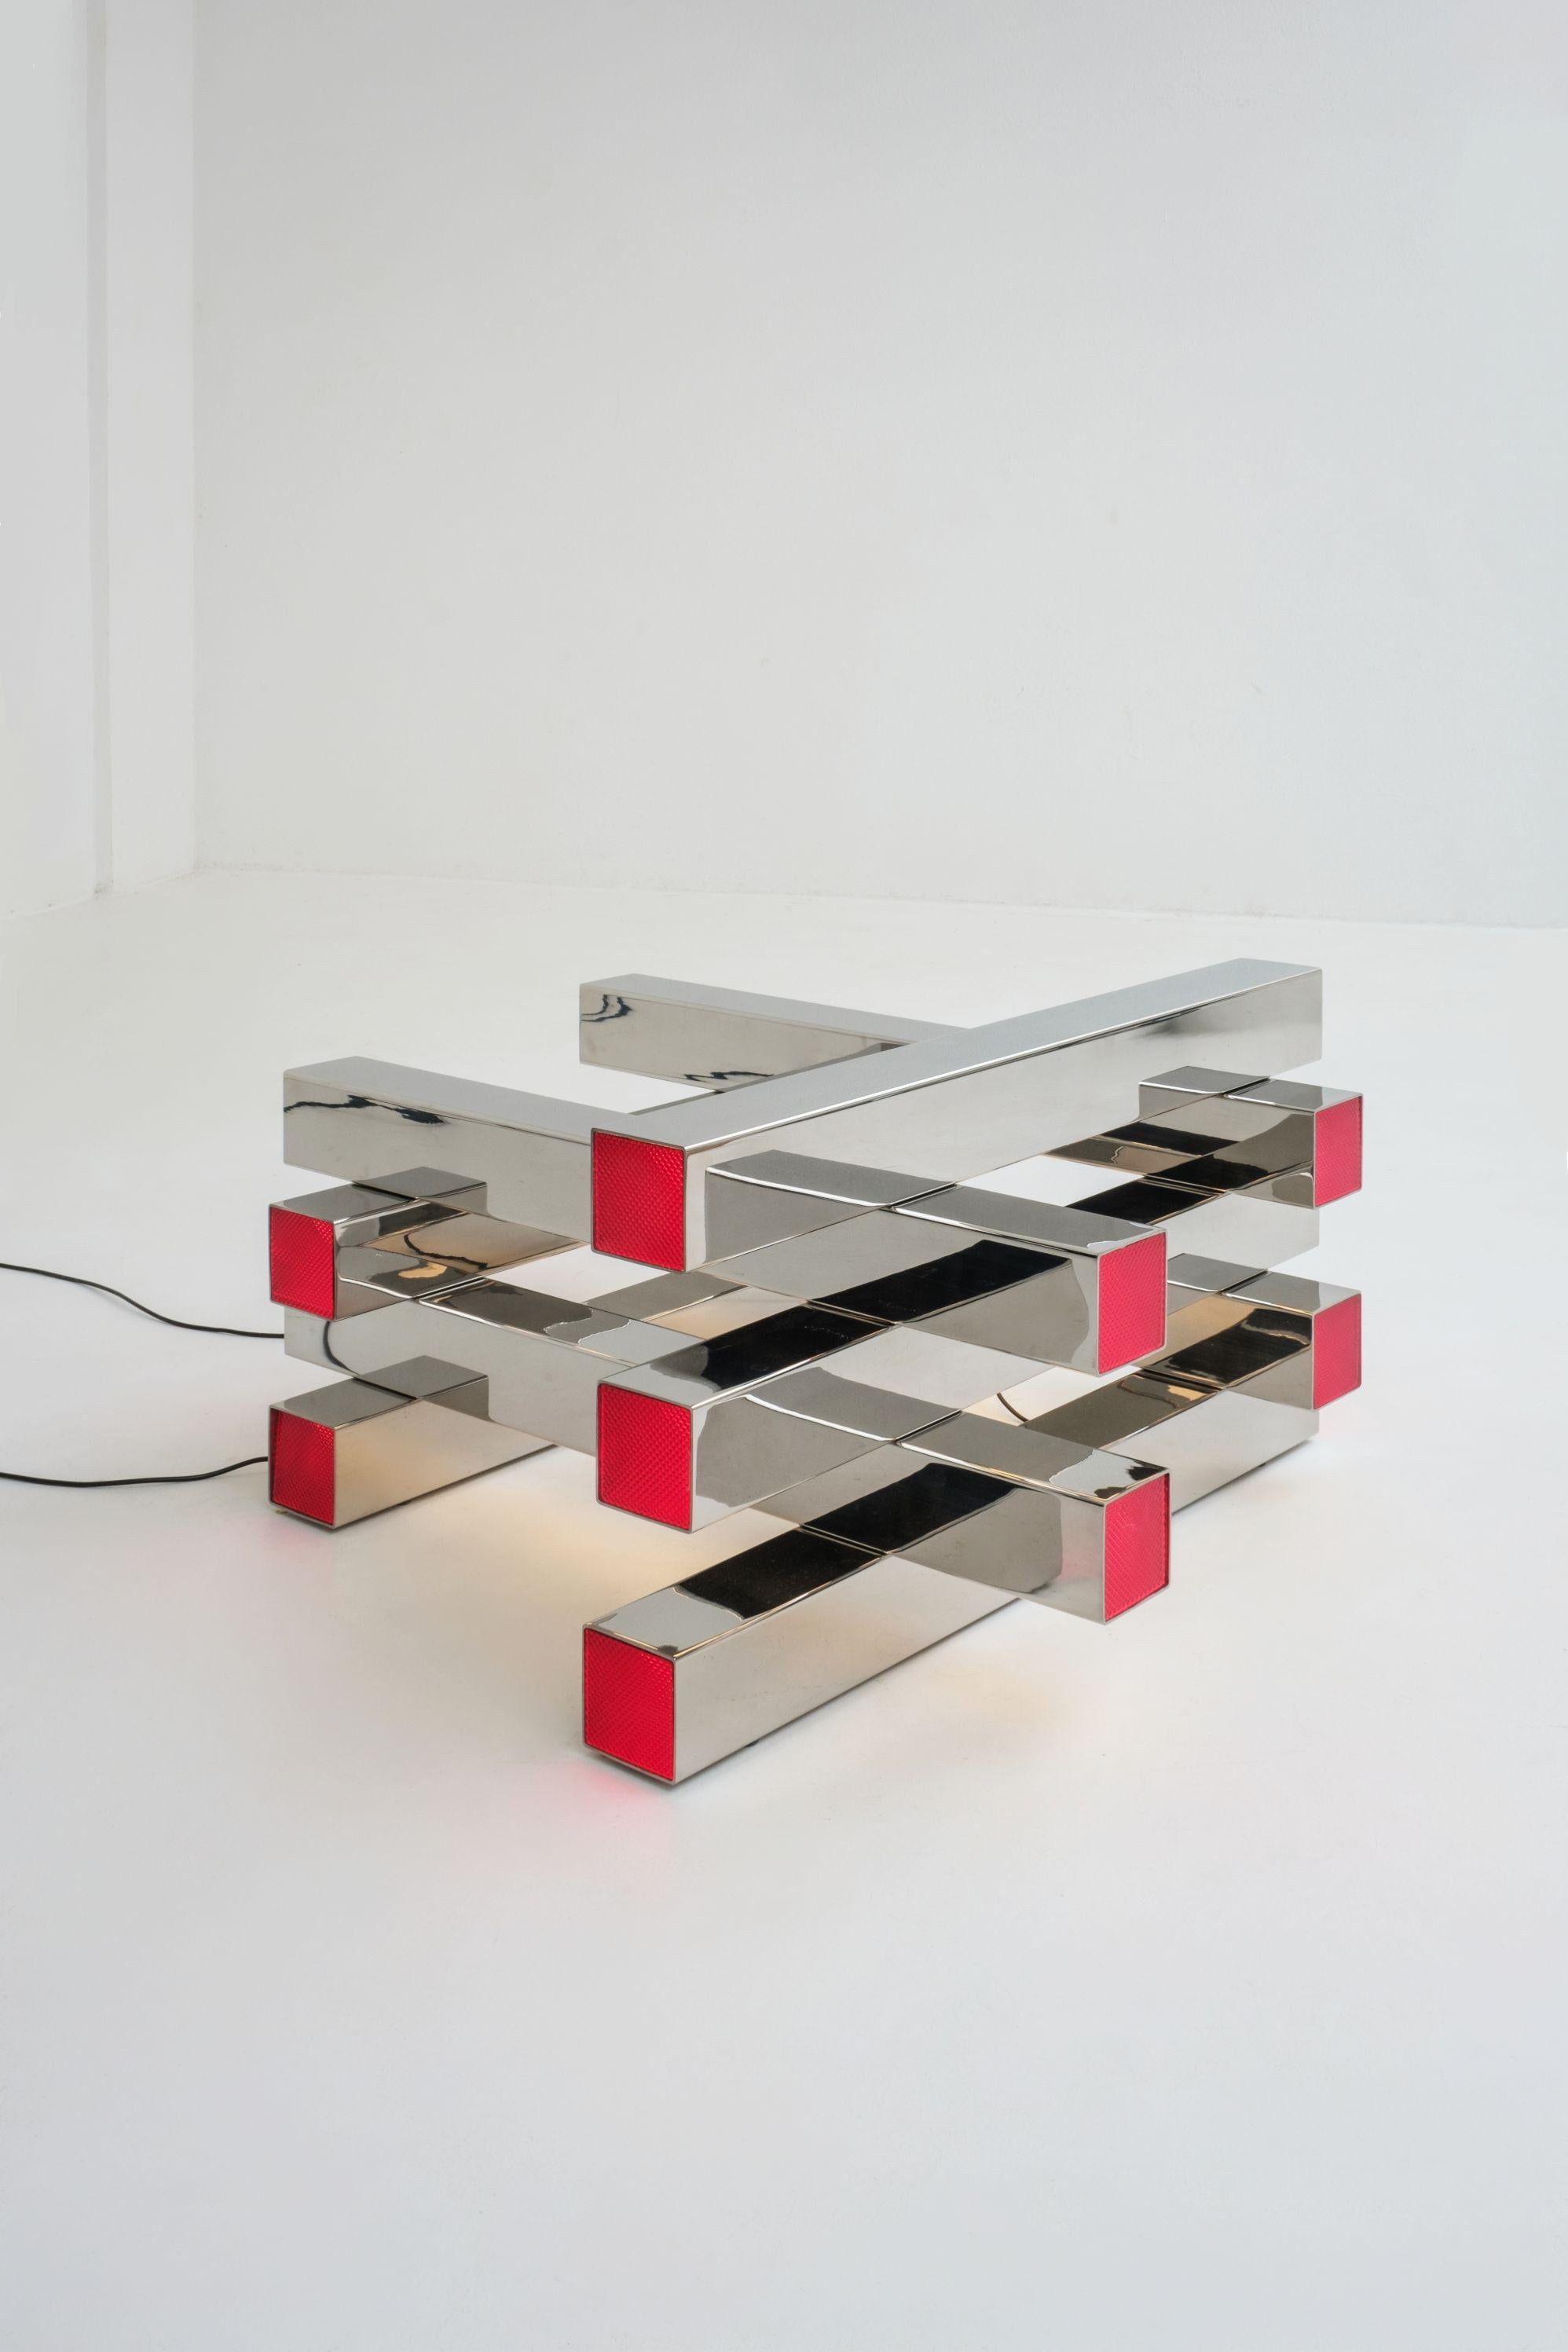 Tbilisi floor light by Nortstudio
Dimensions: 50 x 100 x 100 cm
Materials: Mirror-polished stainless steel. Red structured acrylic.

Stackable and modular floor light. The beams can be stapled on top of each other in various numbers
and